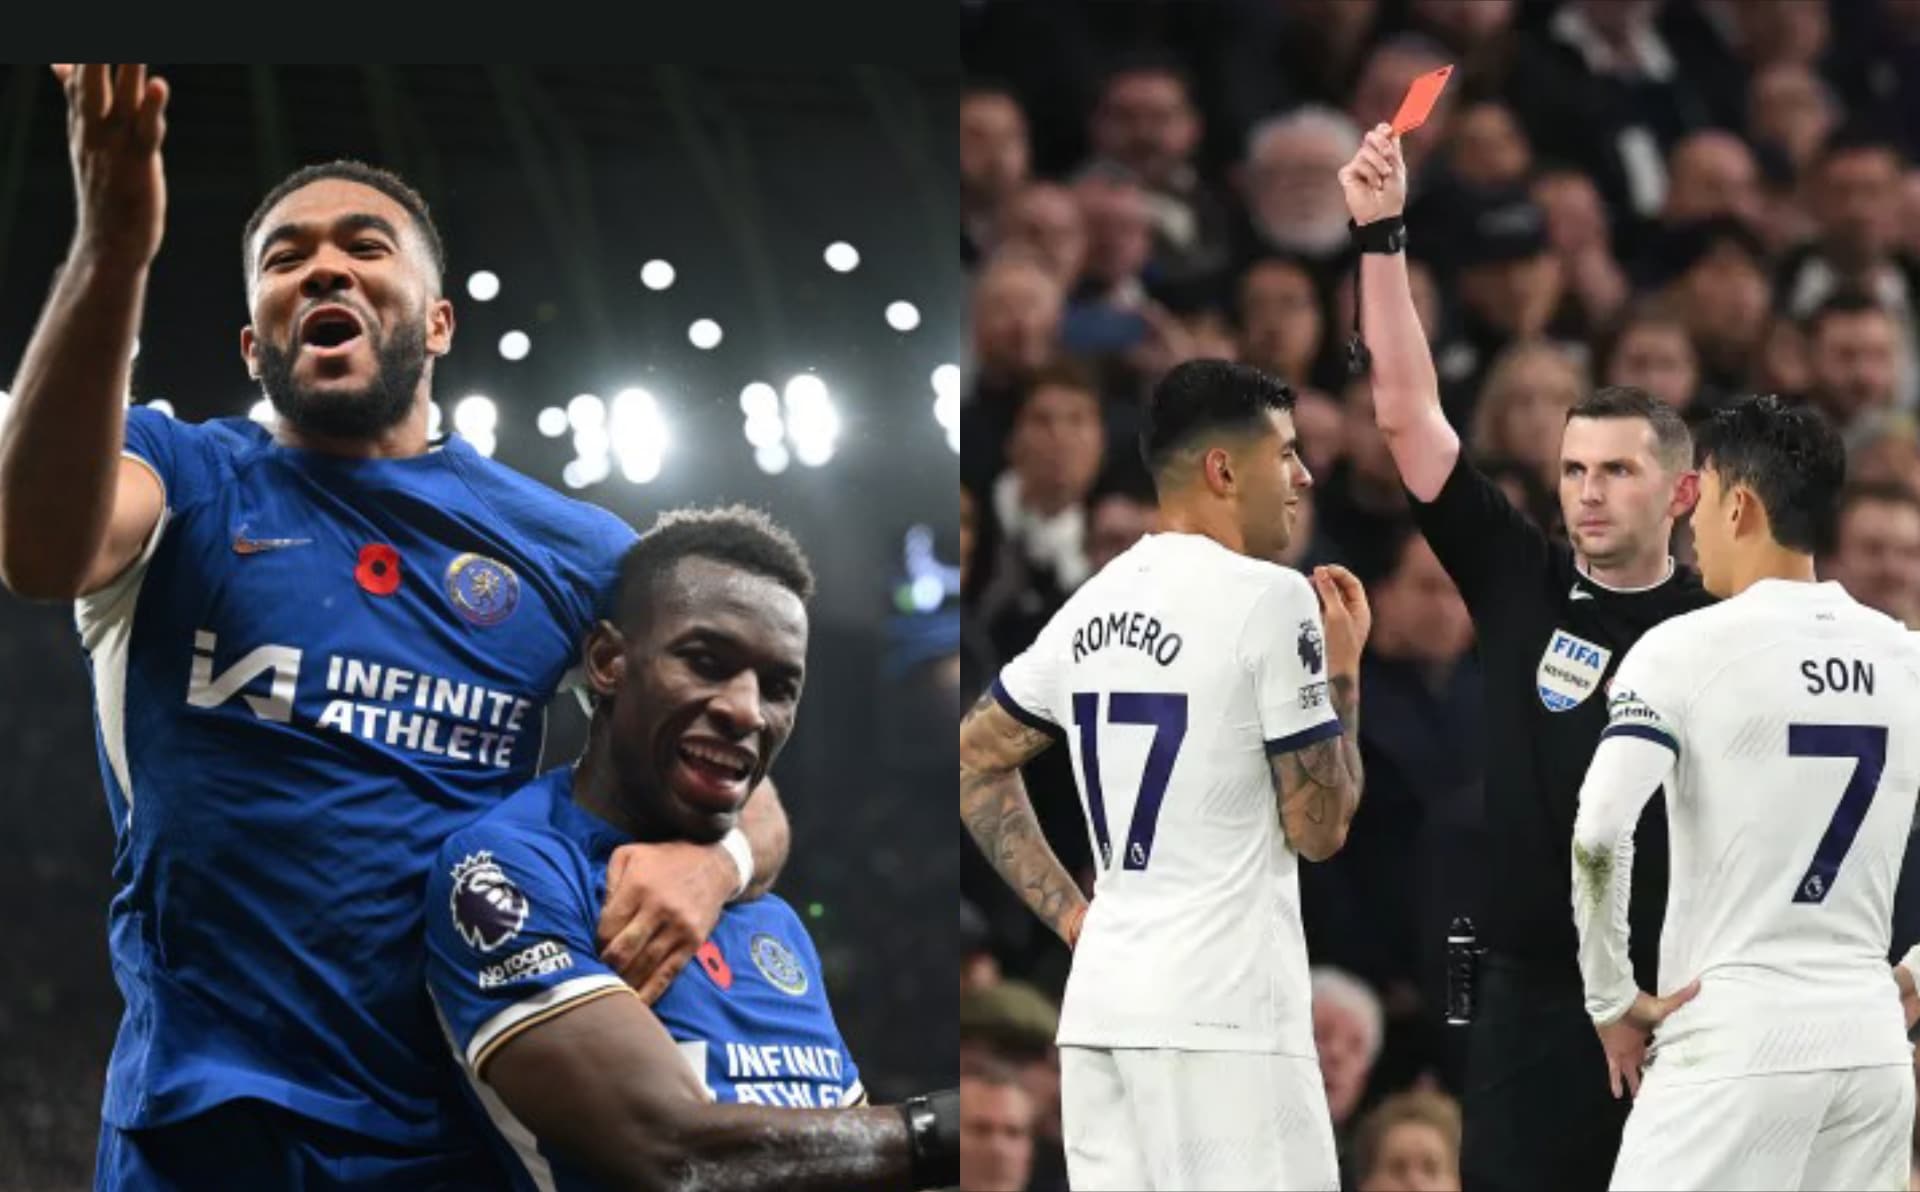 Five goals canceled as Jackson's hat-trick sinks nine-man Spurs in chaotic EPL derby